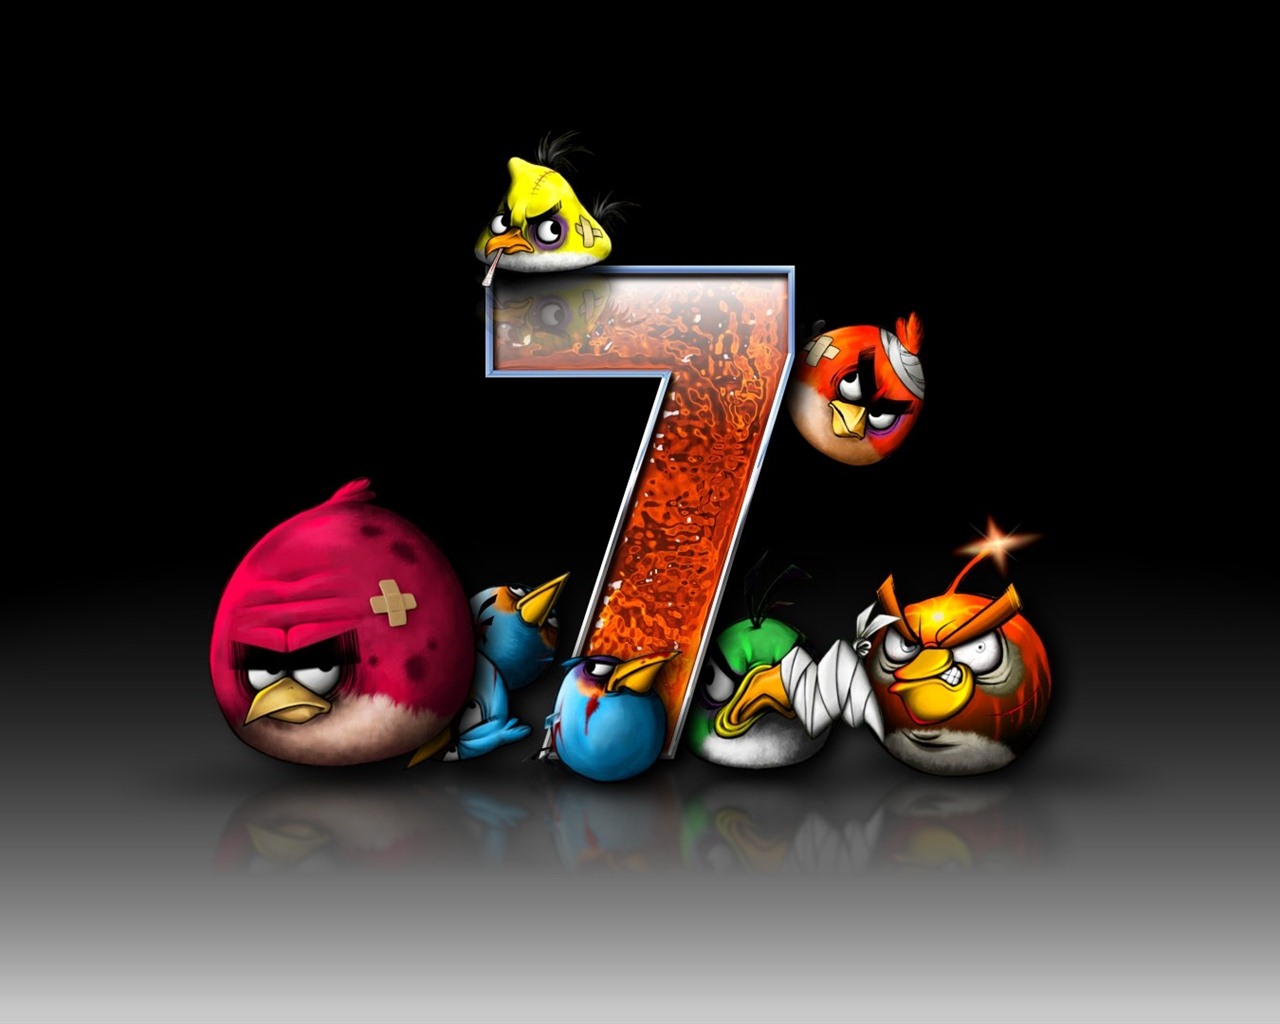 Angry Birds Spiel wallpapers #17 - 1280x1024